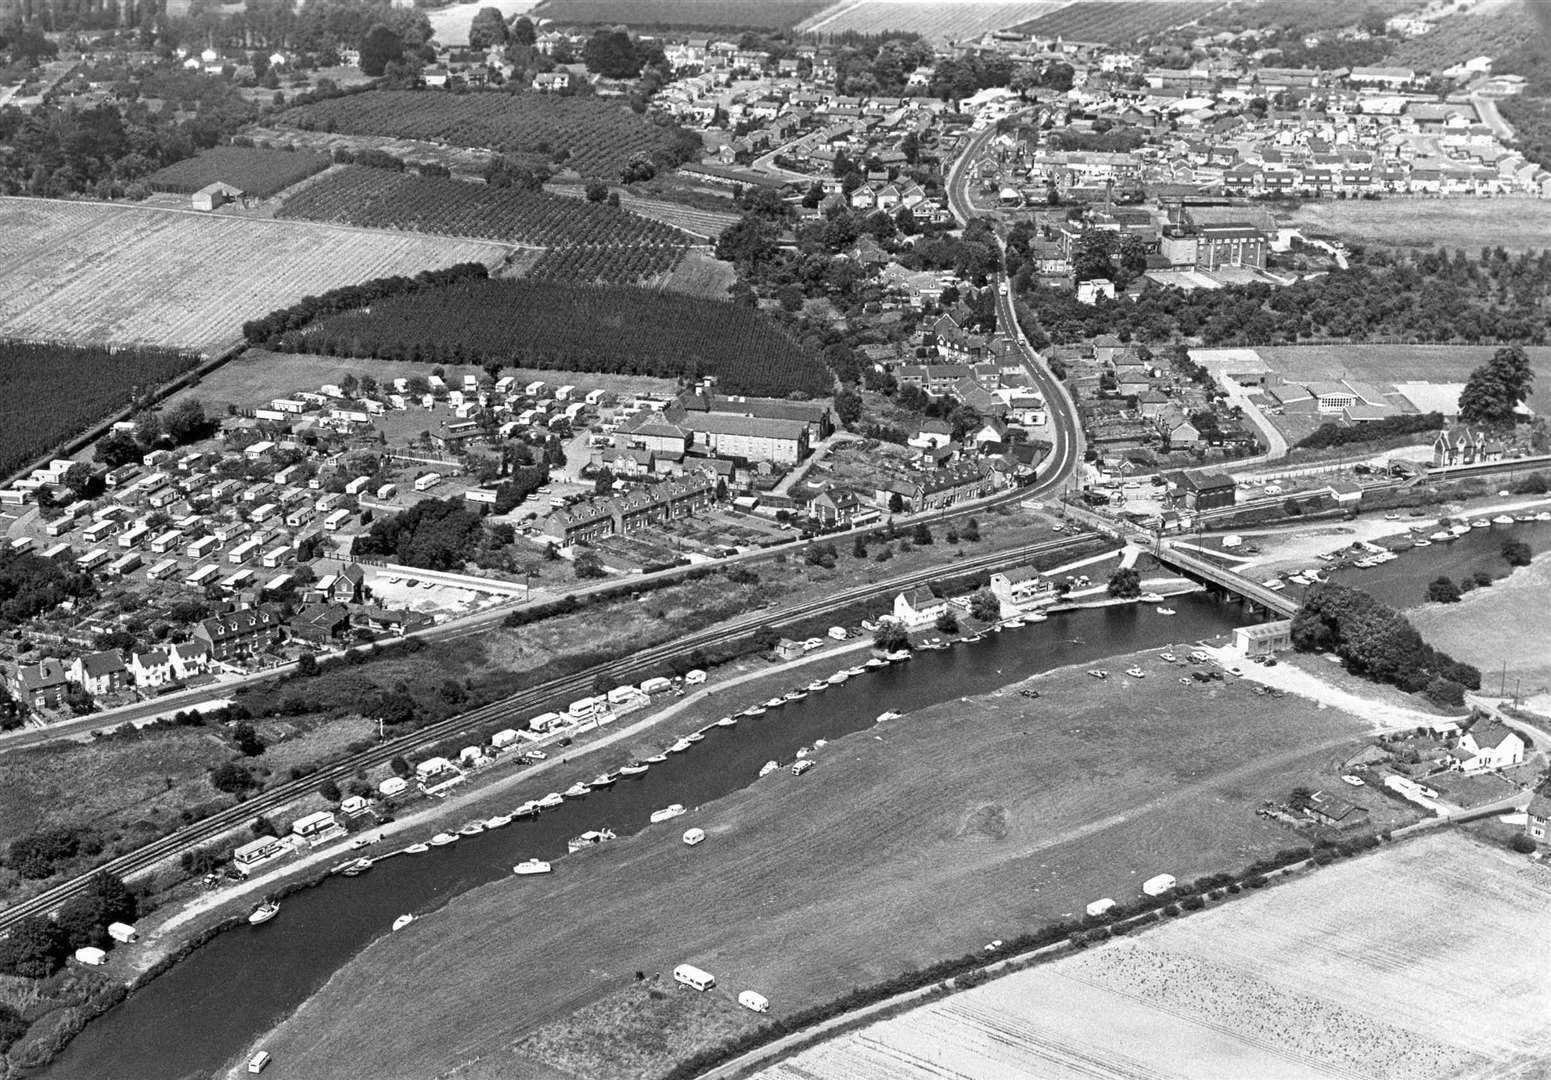 Another aerial photo from 1978, this time of Wateringbury